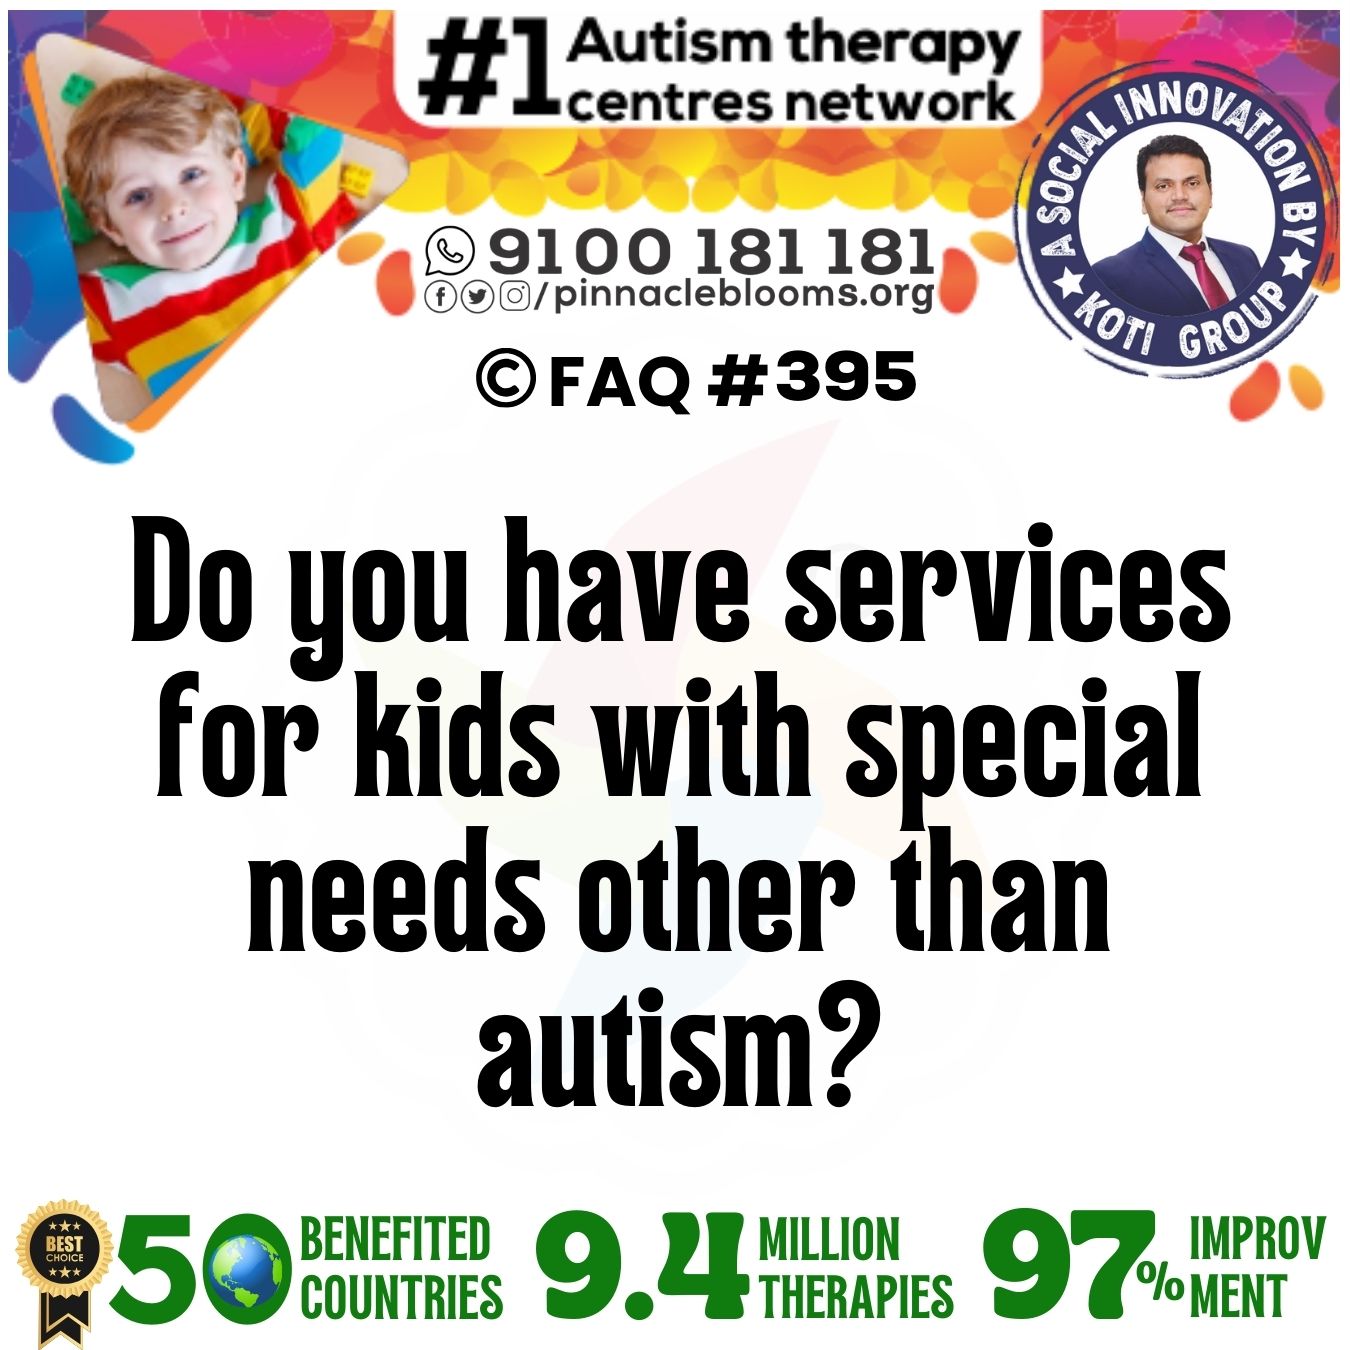 Do you have services for kids with special needs other than autism?